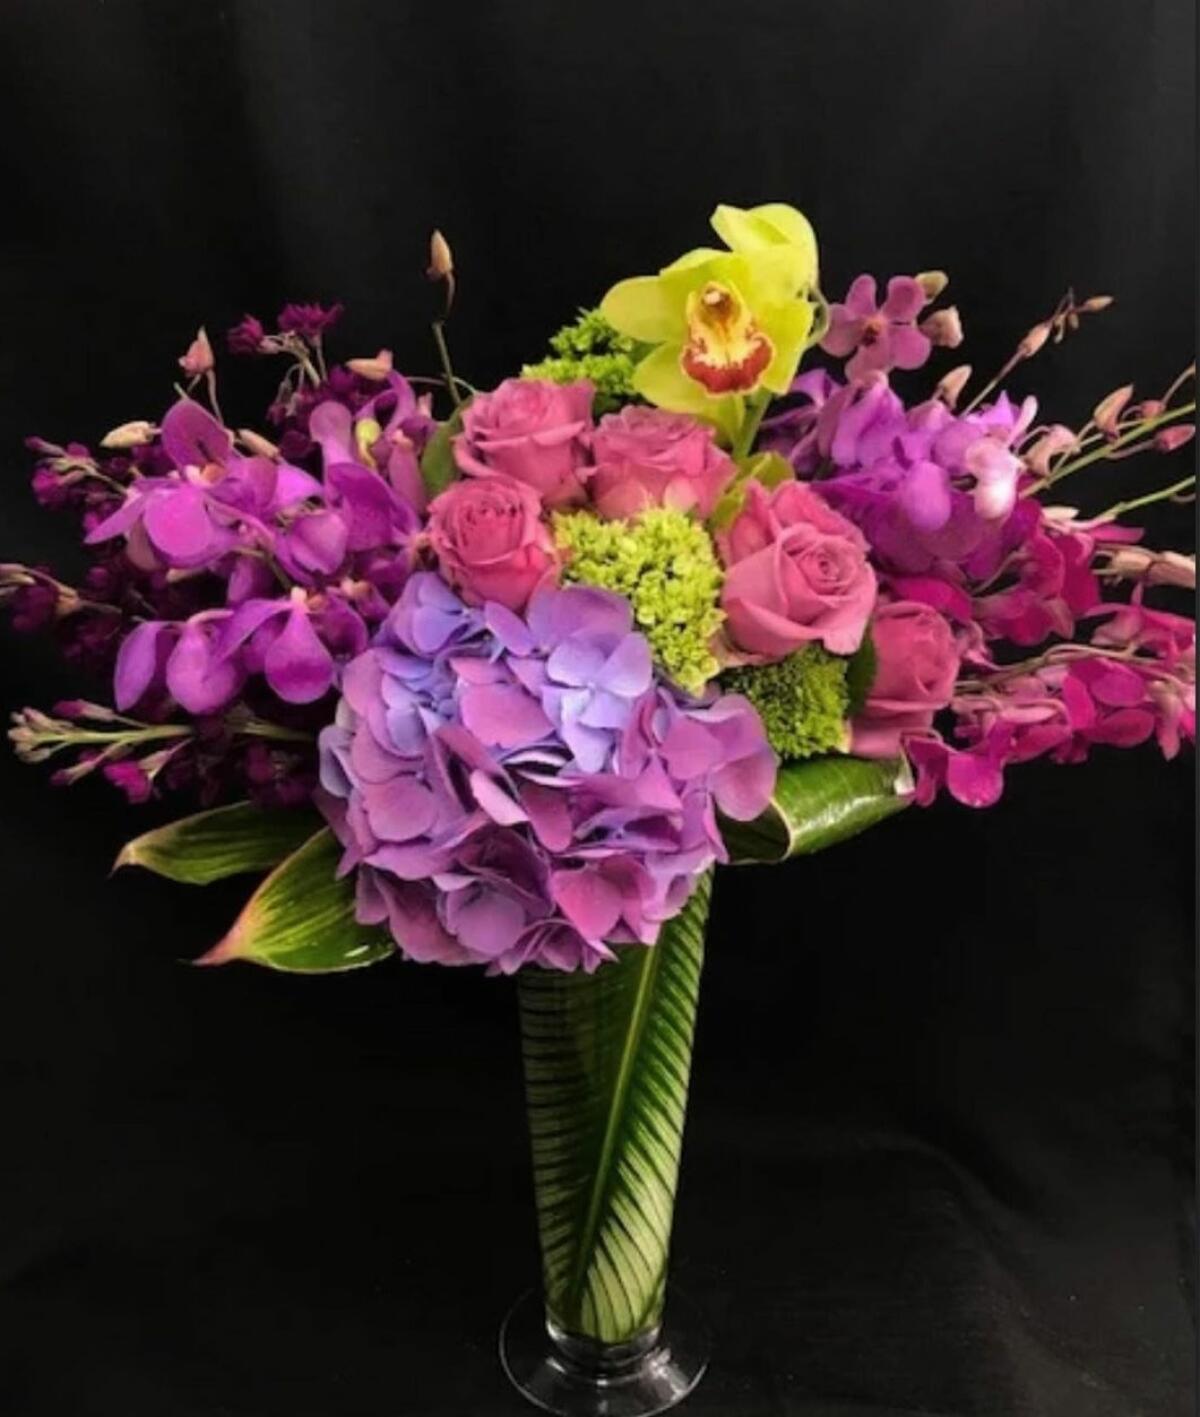 La Jolla Florist's custom arrangements can be as small as a “just because” bouquet to as large as a wedding display.